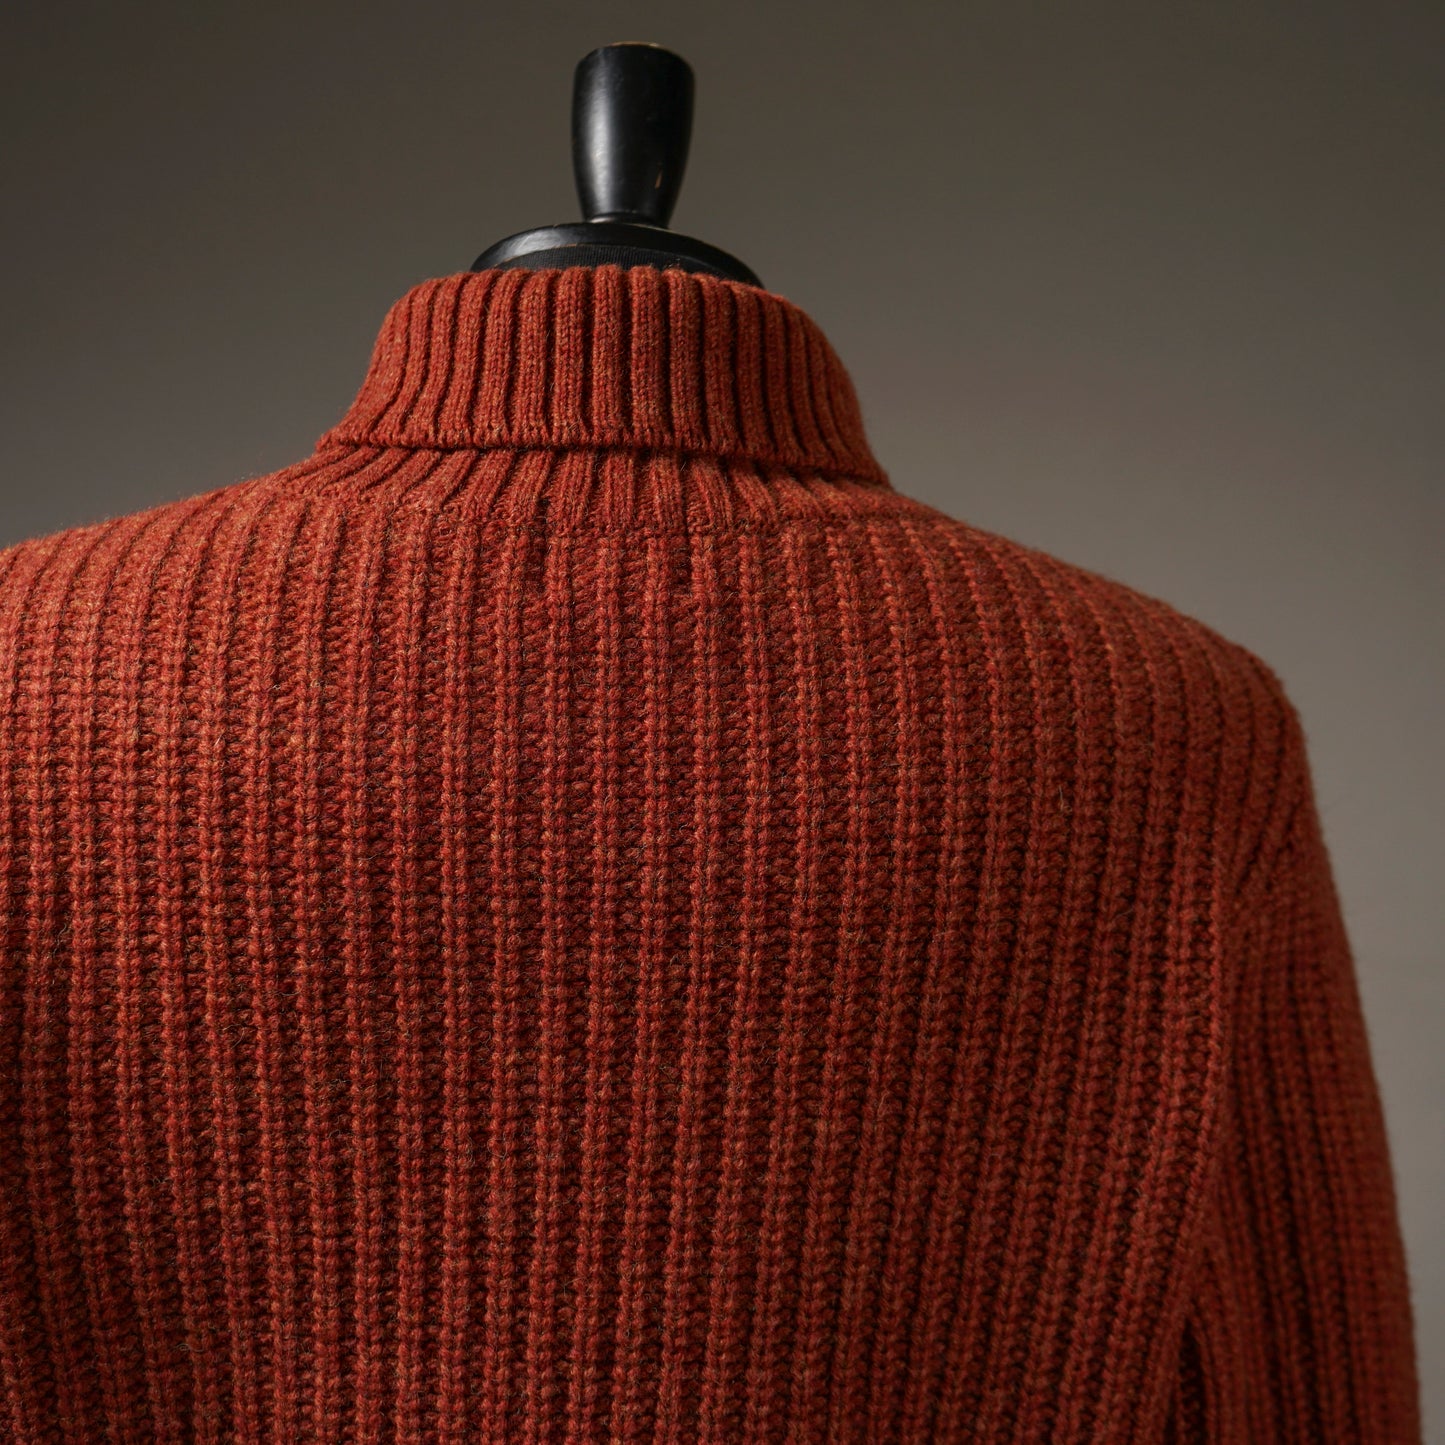 COUNTRY GENT - TURTLE NECK SWEATER / BYGH-22-AW-19